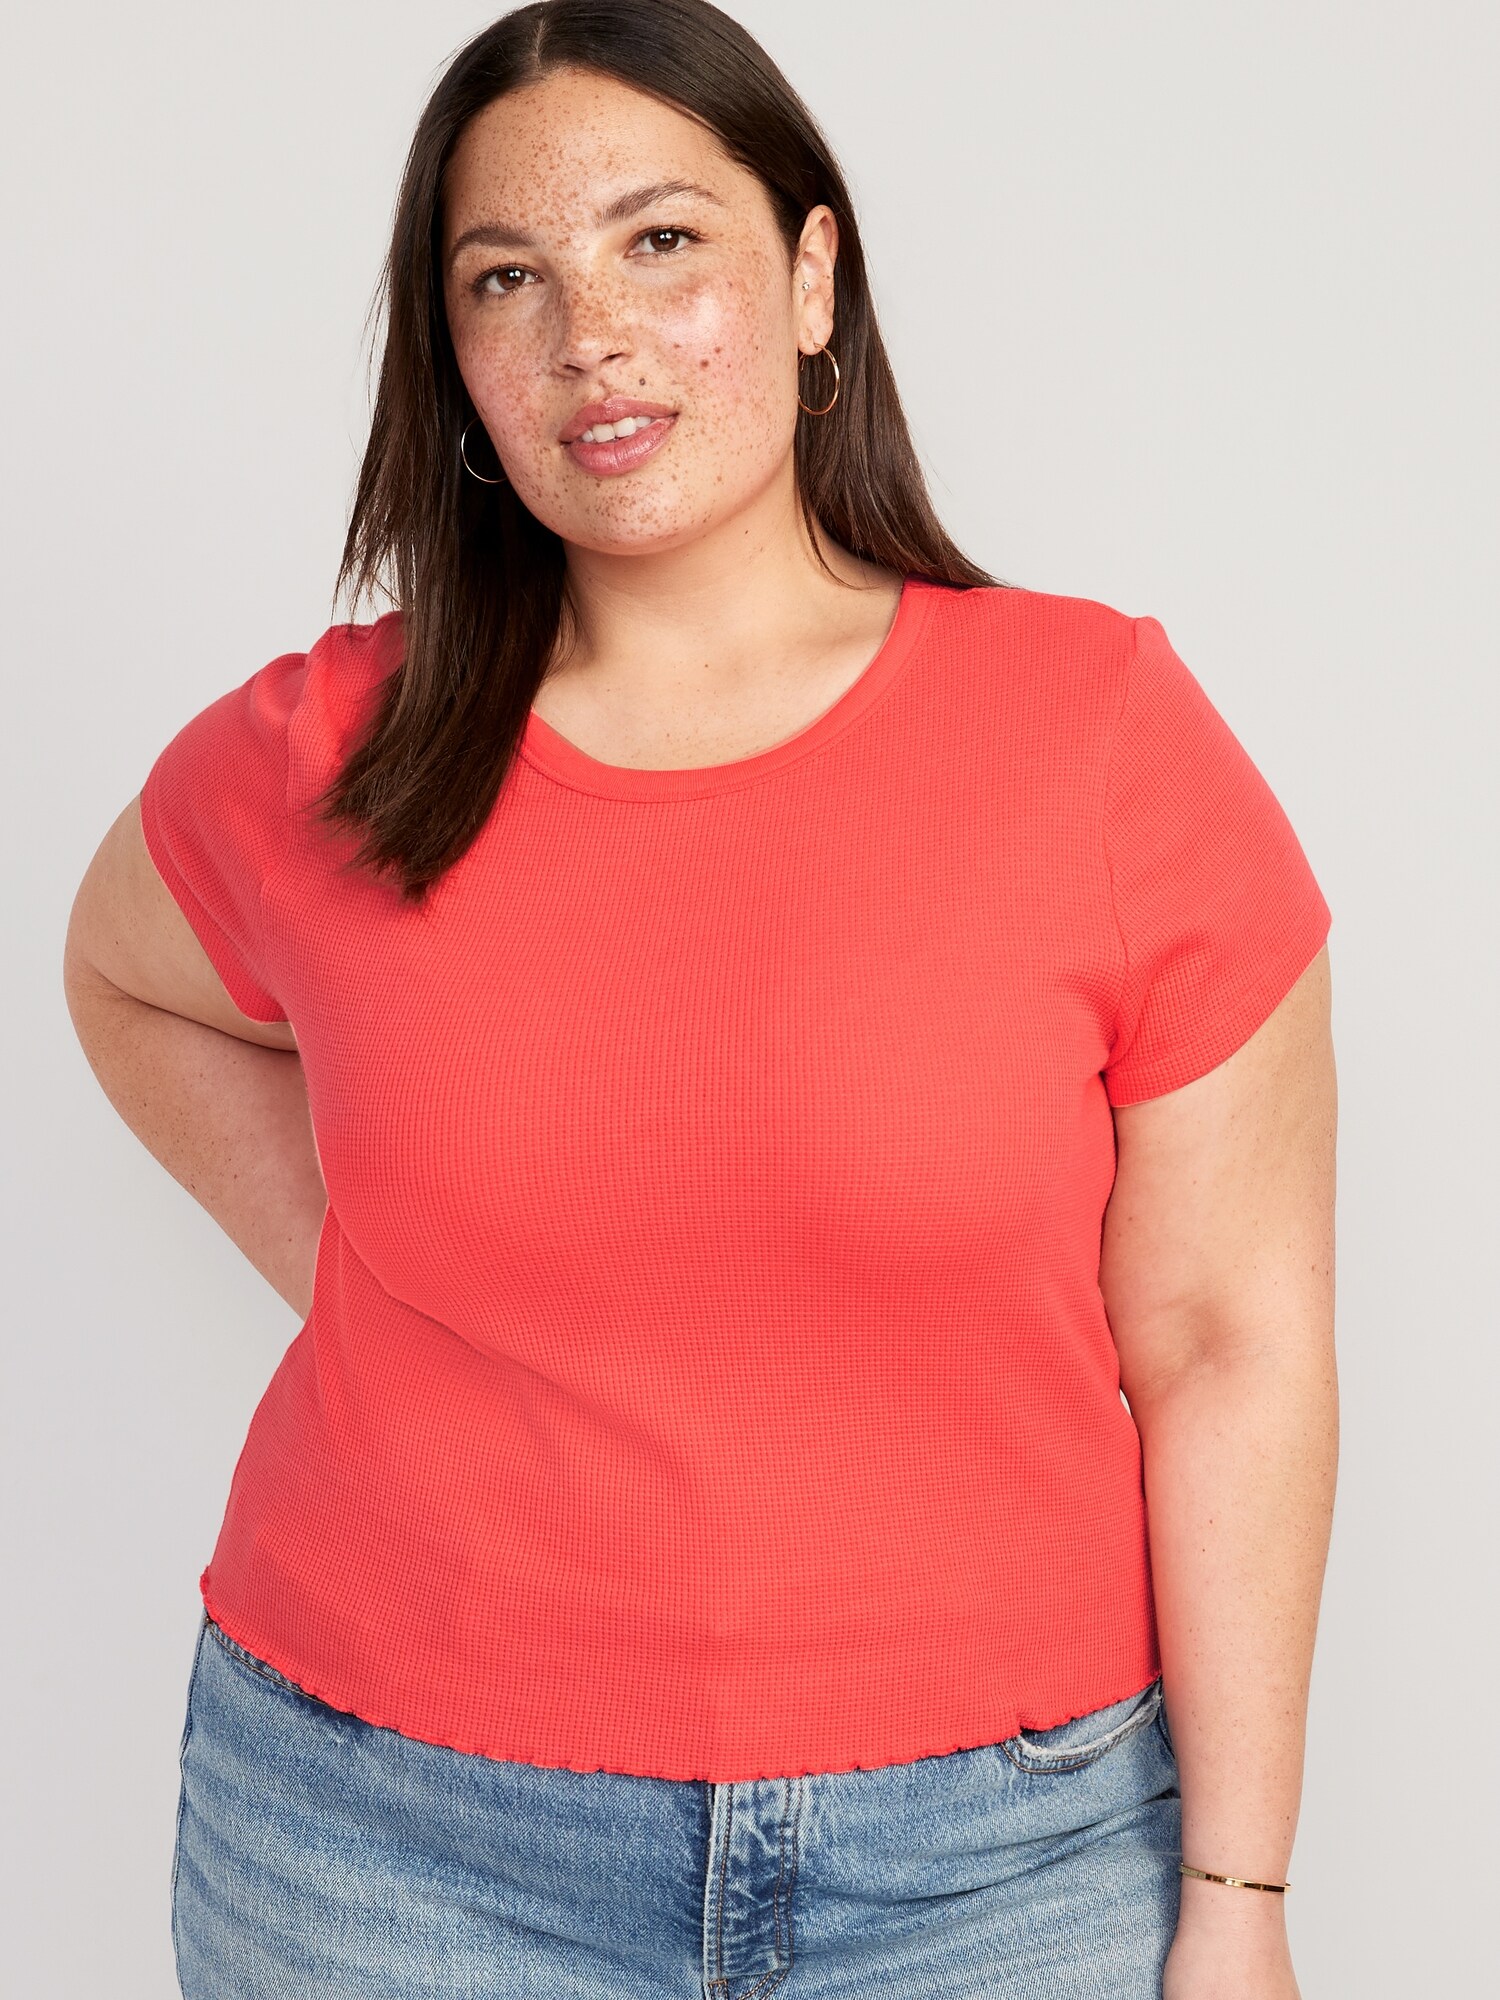 Women's Red Lettuce Edge Tee Half Sleeve at Rs 185, Women's Lettuce Edge  Tee in Noida